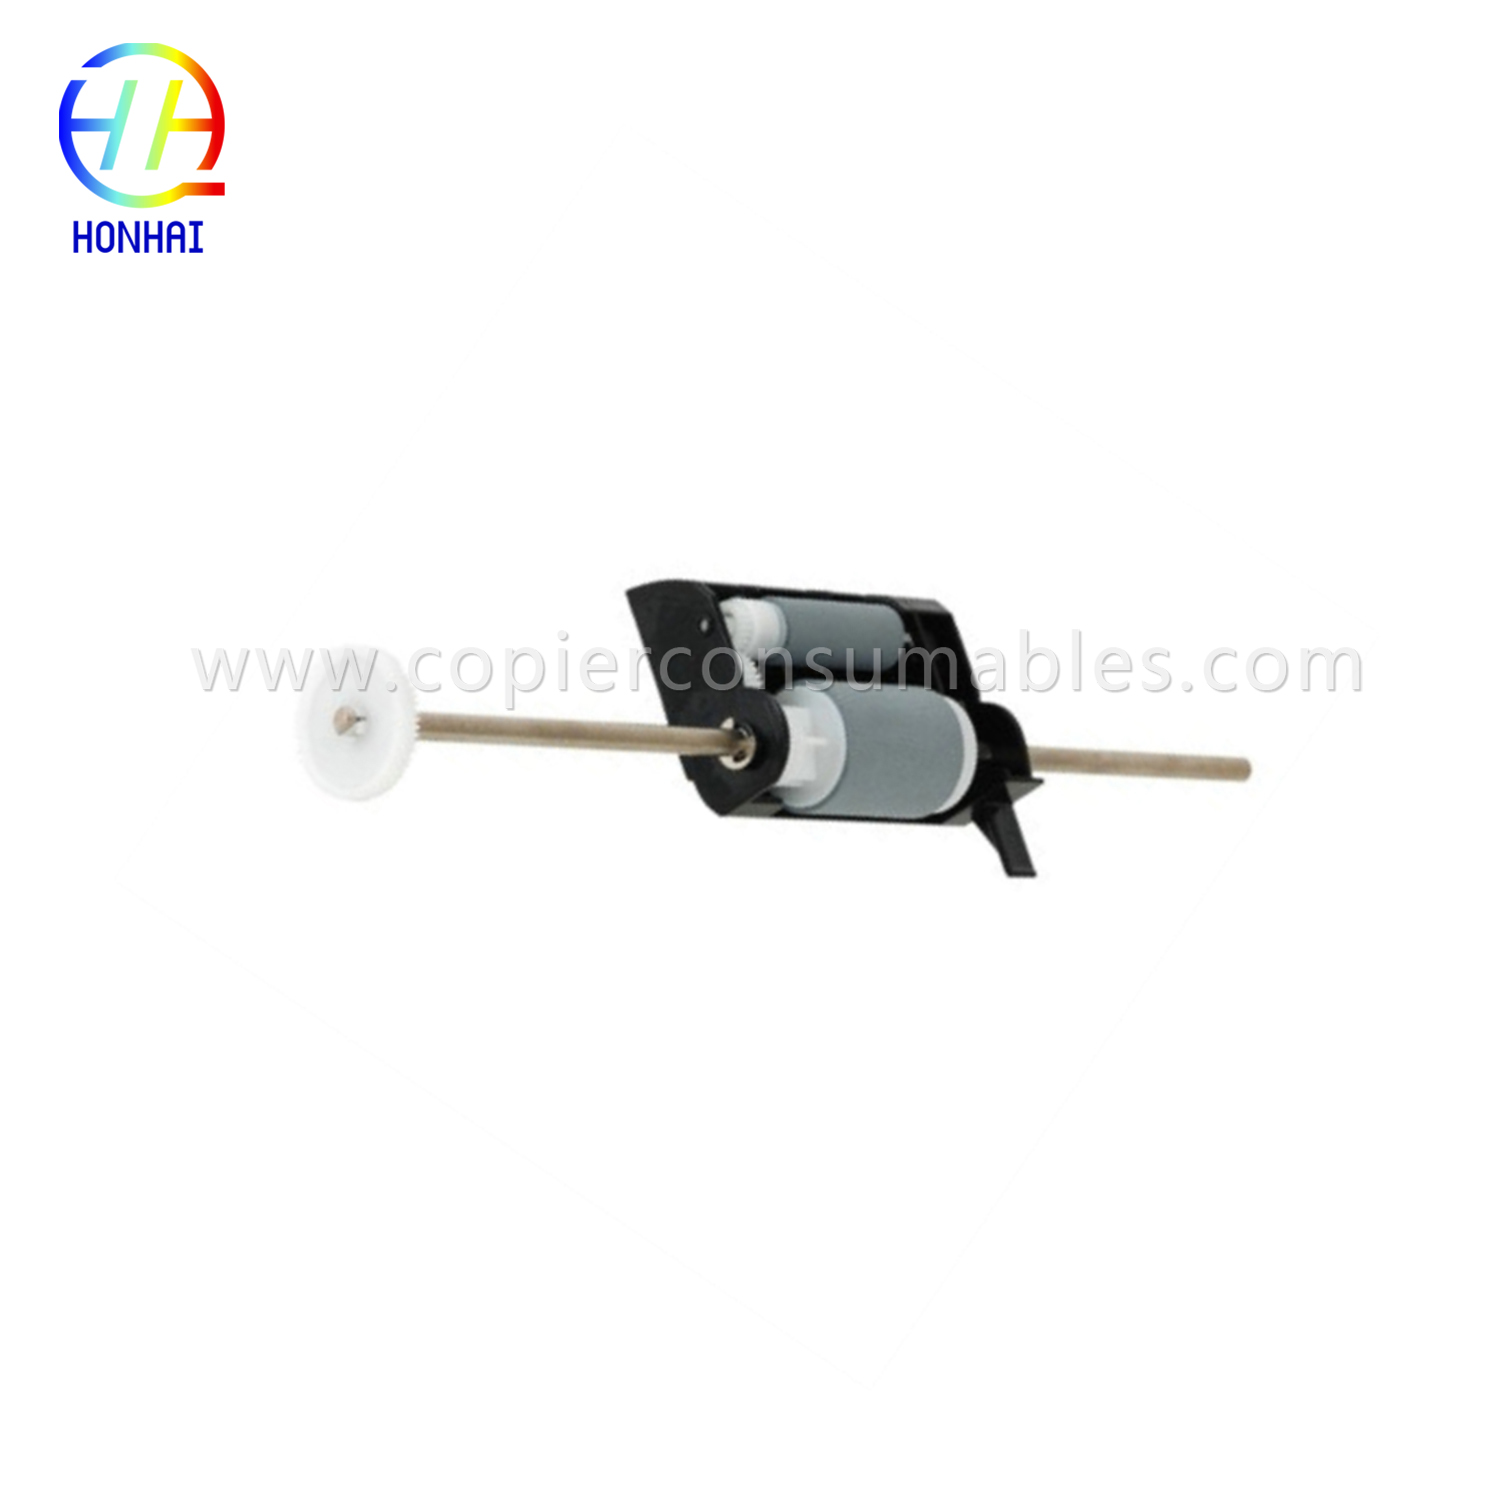 Document Separation Roller Assembly for Brother MFC-8710dw 8515 8910 8520 8510 8600 8900 8950 8370 DCP8150dn Lx9098001